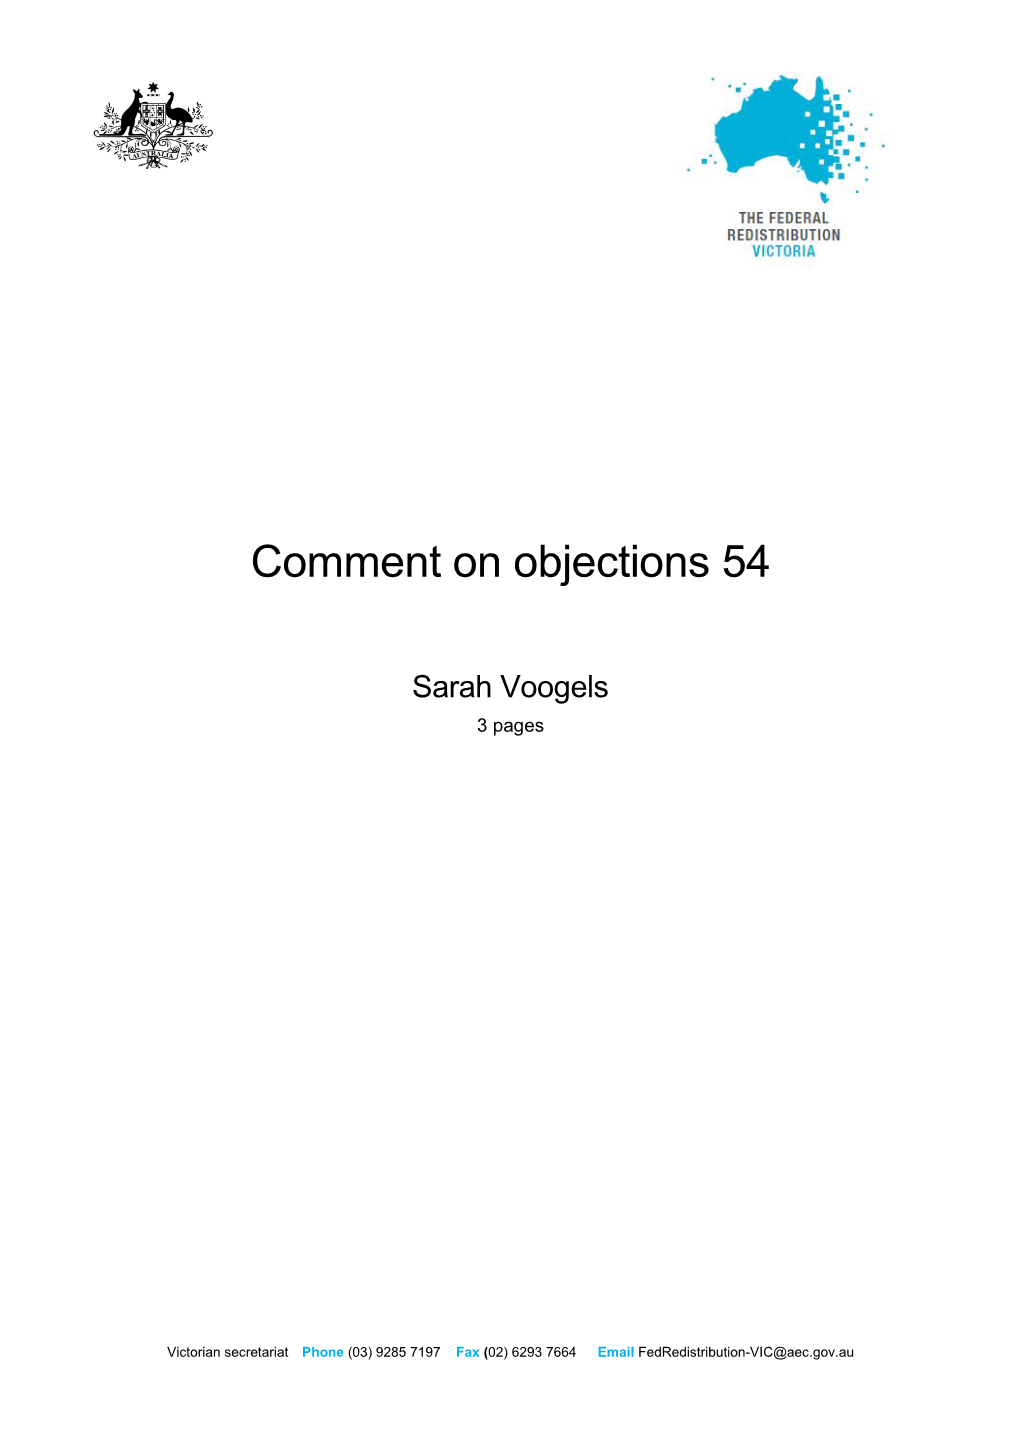 Comment on Objections 54